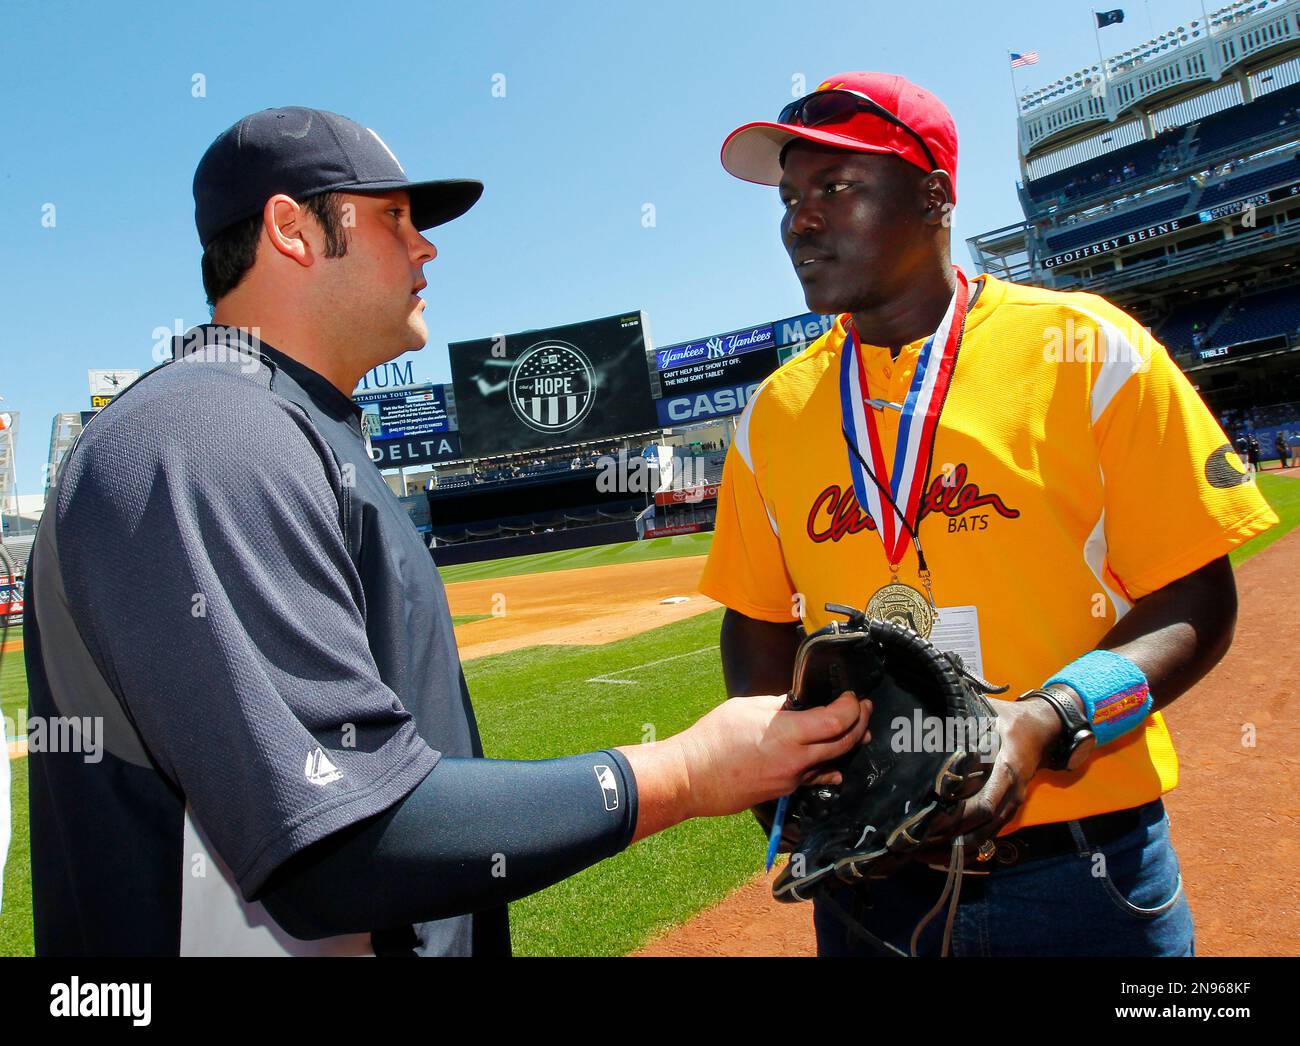 New York Yankees pitcher Joba Chamberlain, left, presents Odong Henry,  manager of the Little League baseball team from Uganda, with a glove on the  field before the start of of a baseball